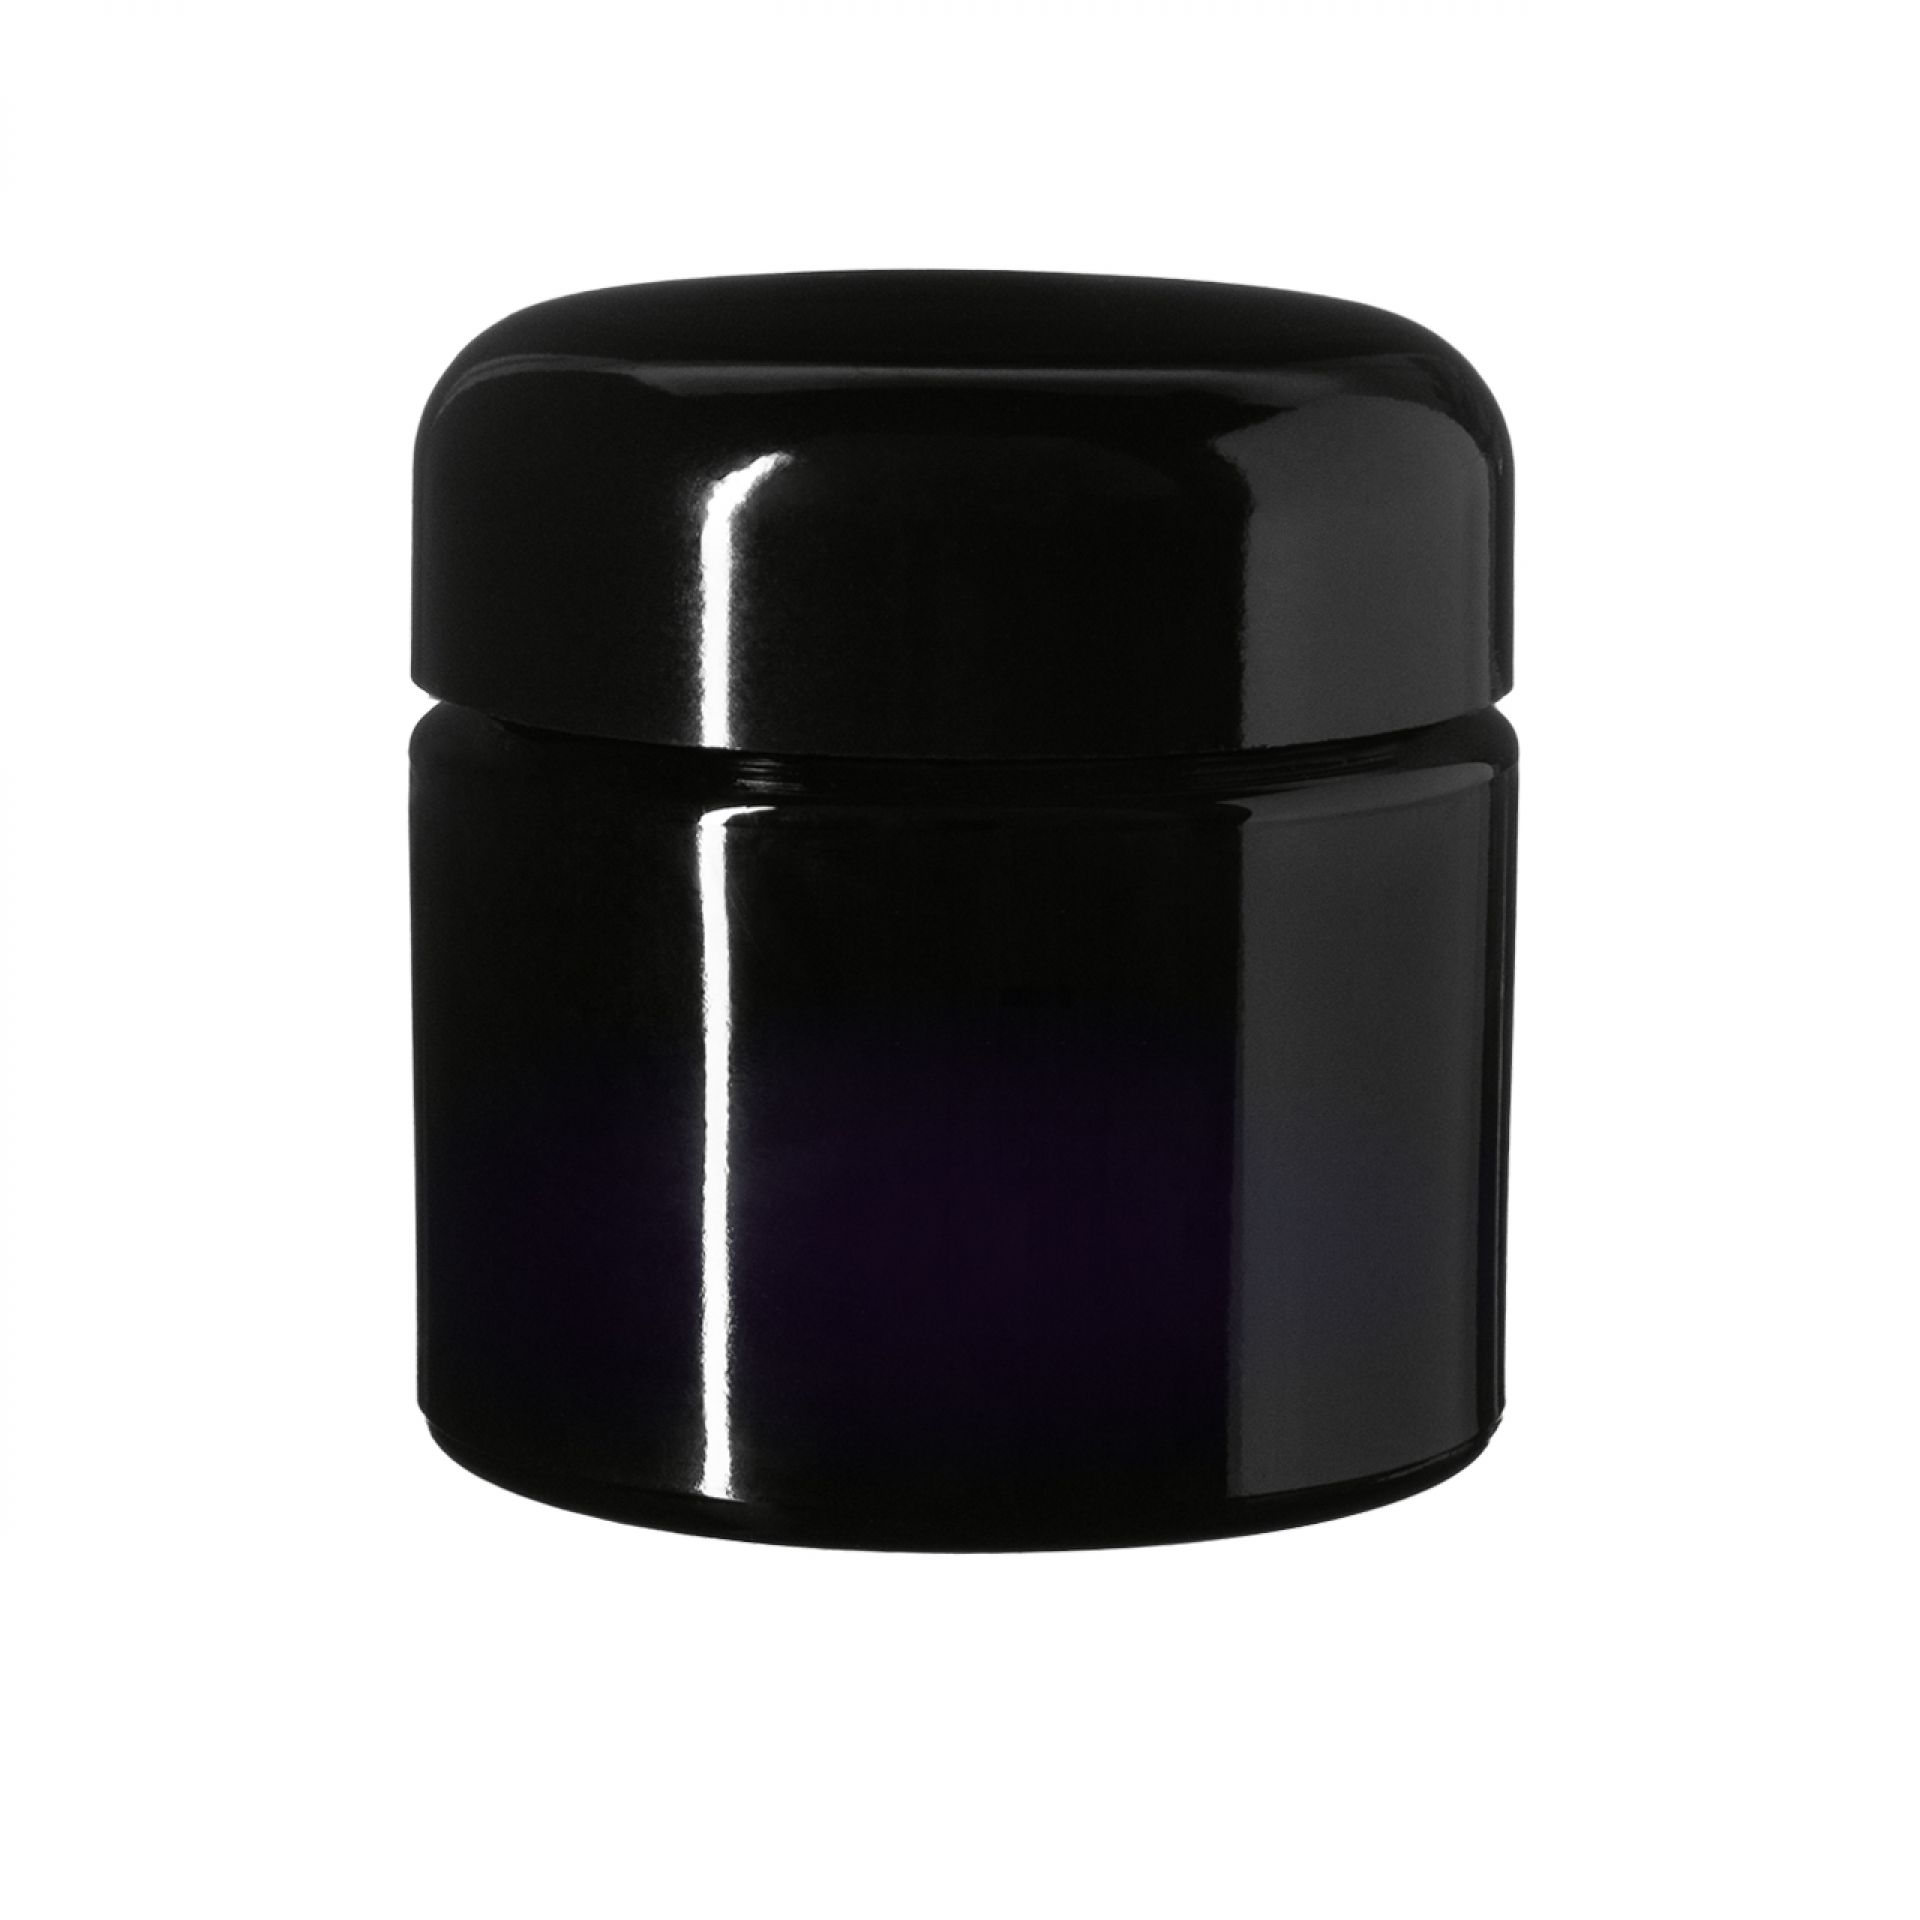 Lid Classic 58 special thread, UREA, black, glossy finish, violet Phan inlay (Ceres 100/Carina 500)